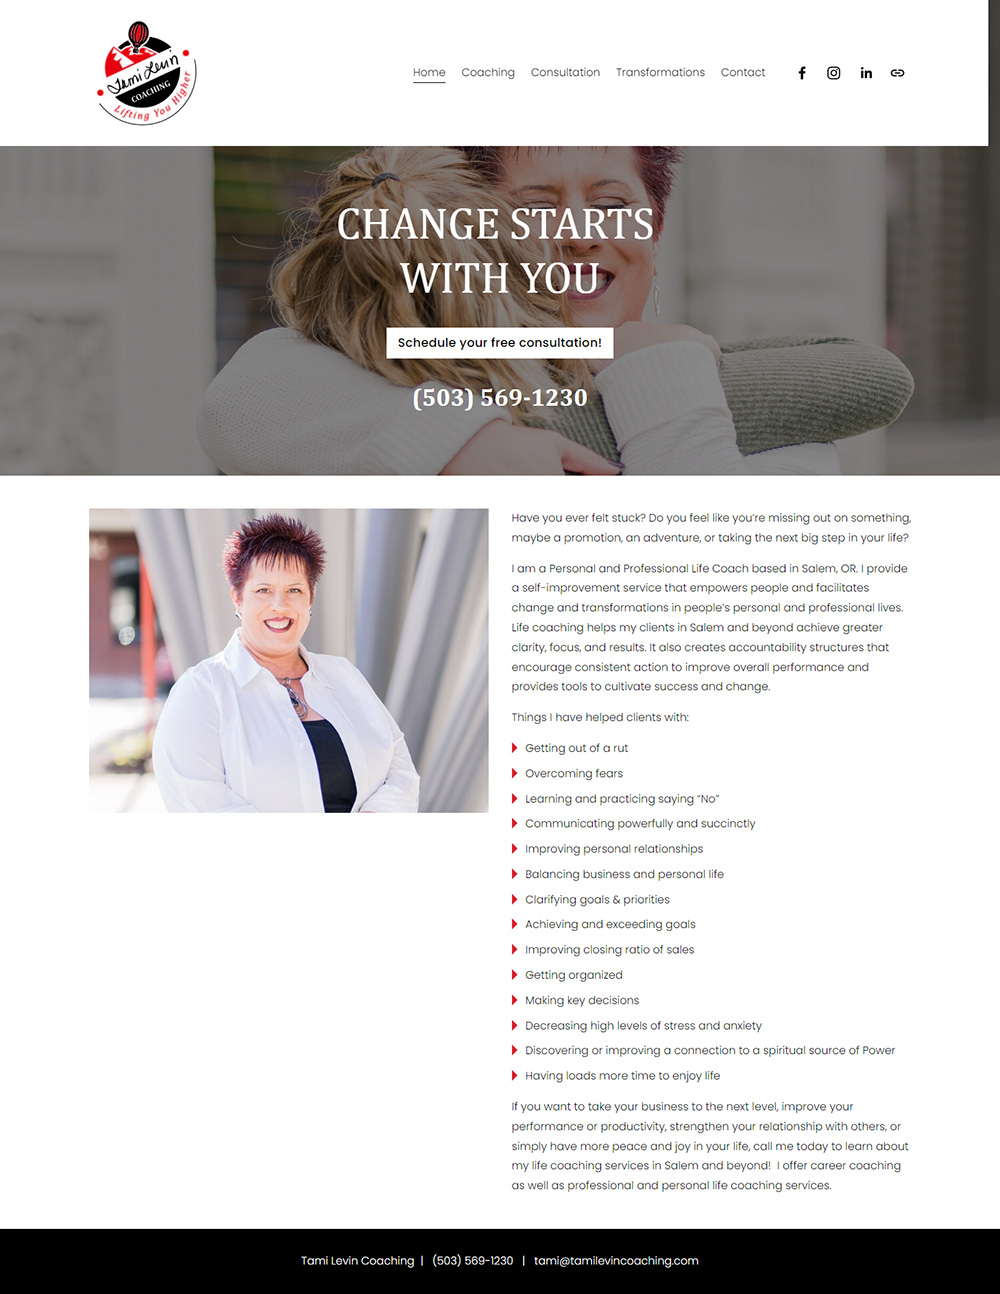 Tami Levin Coaching Home page before redesign